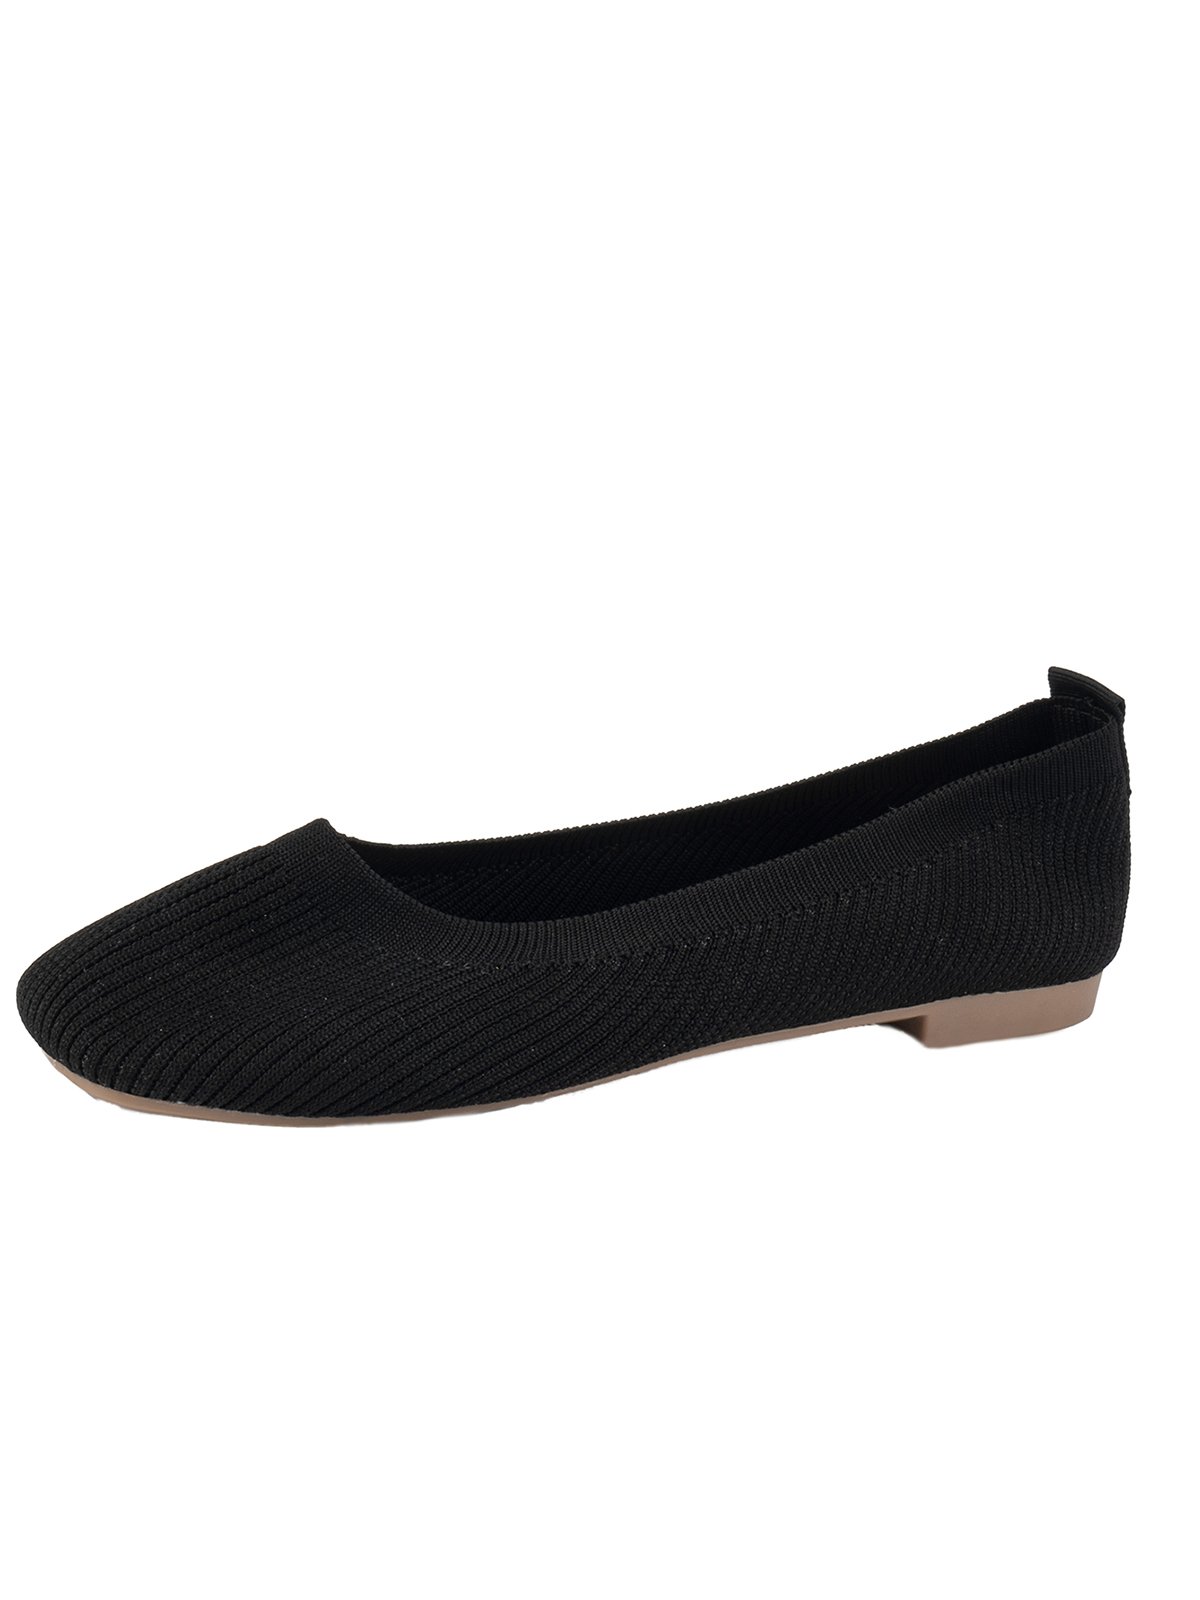 Casual Plain Breathable Slip On Flat Heel Shallow Shoes | noracora